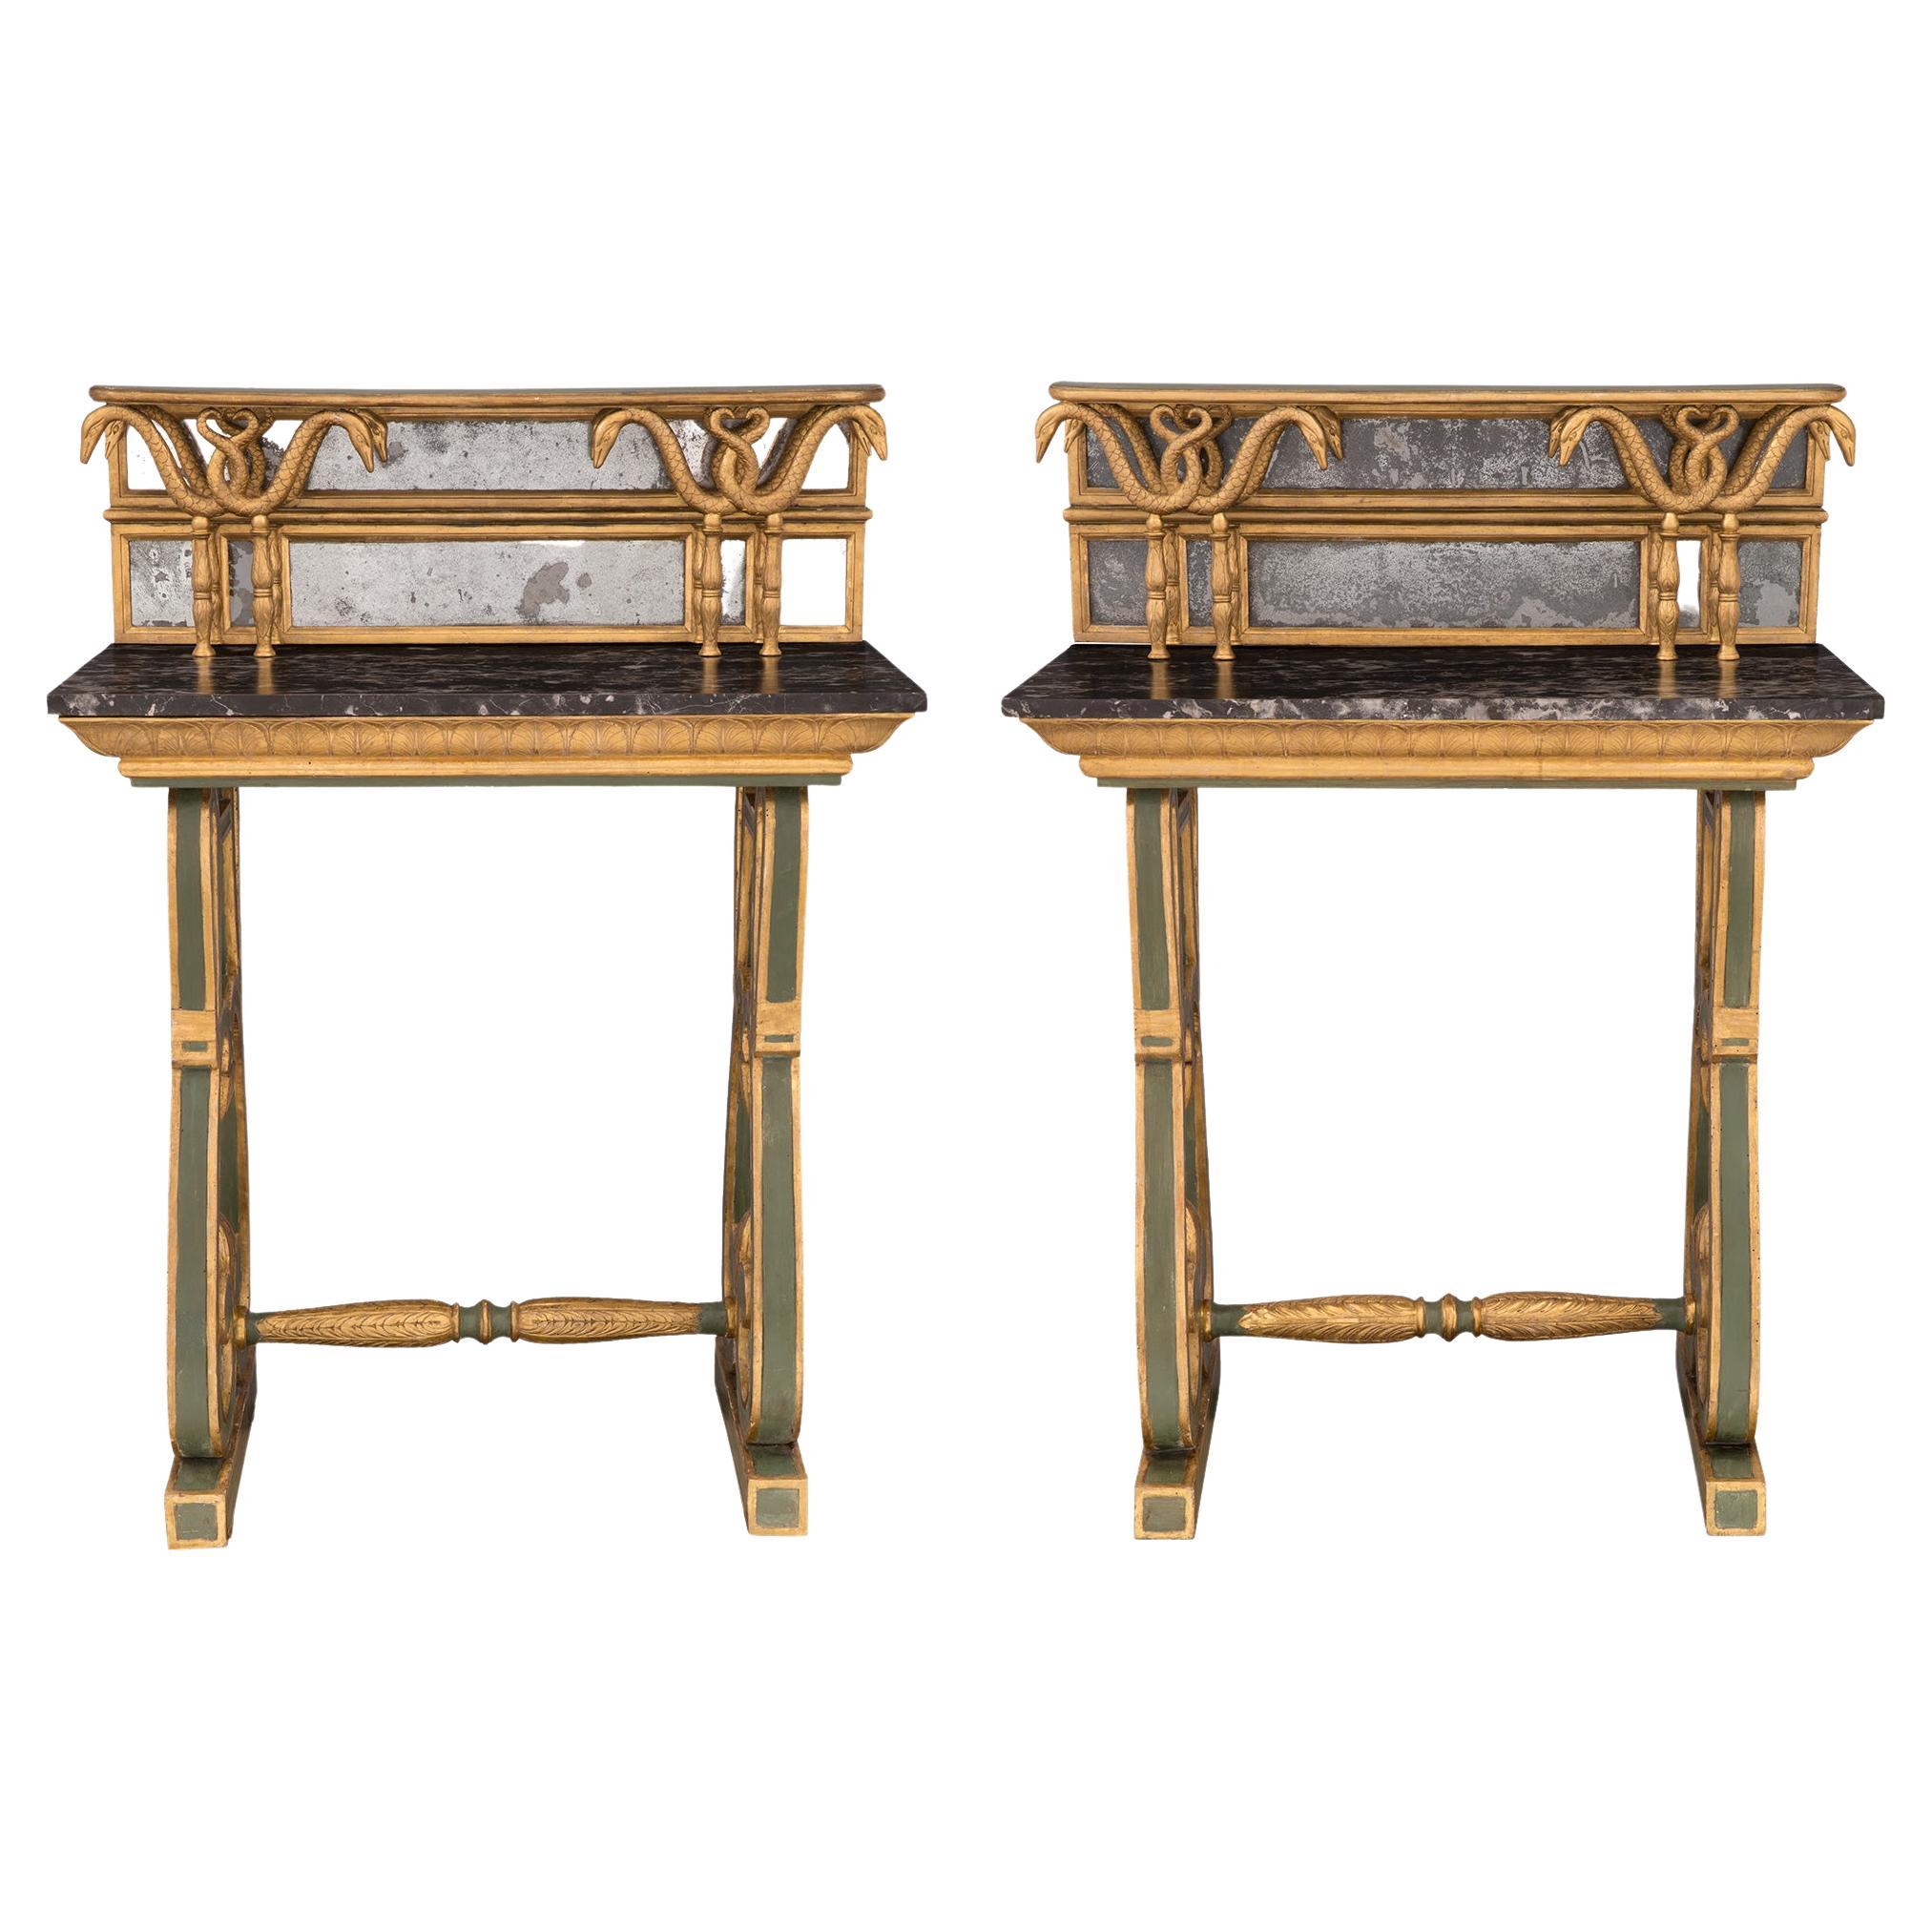 Pair of Italian 18th Century Neoclassical St. Freestanding Consoles For Sale